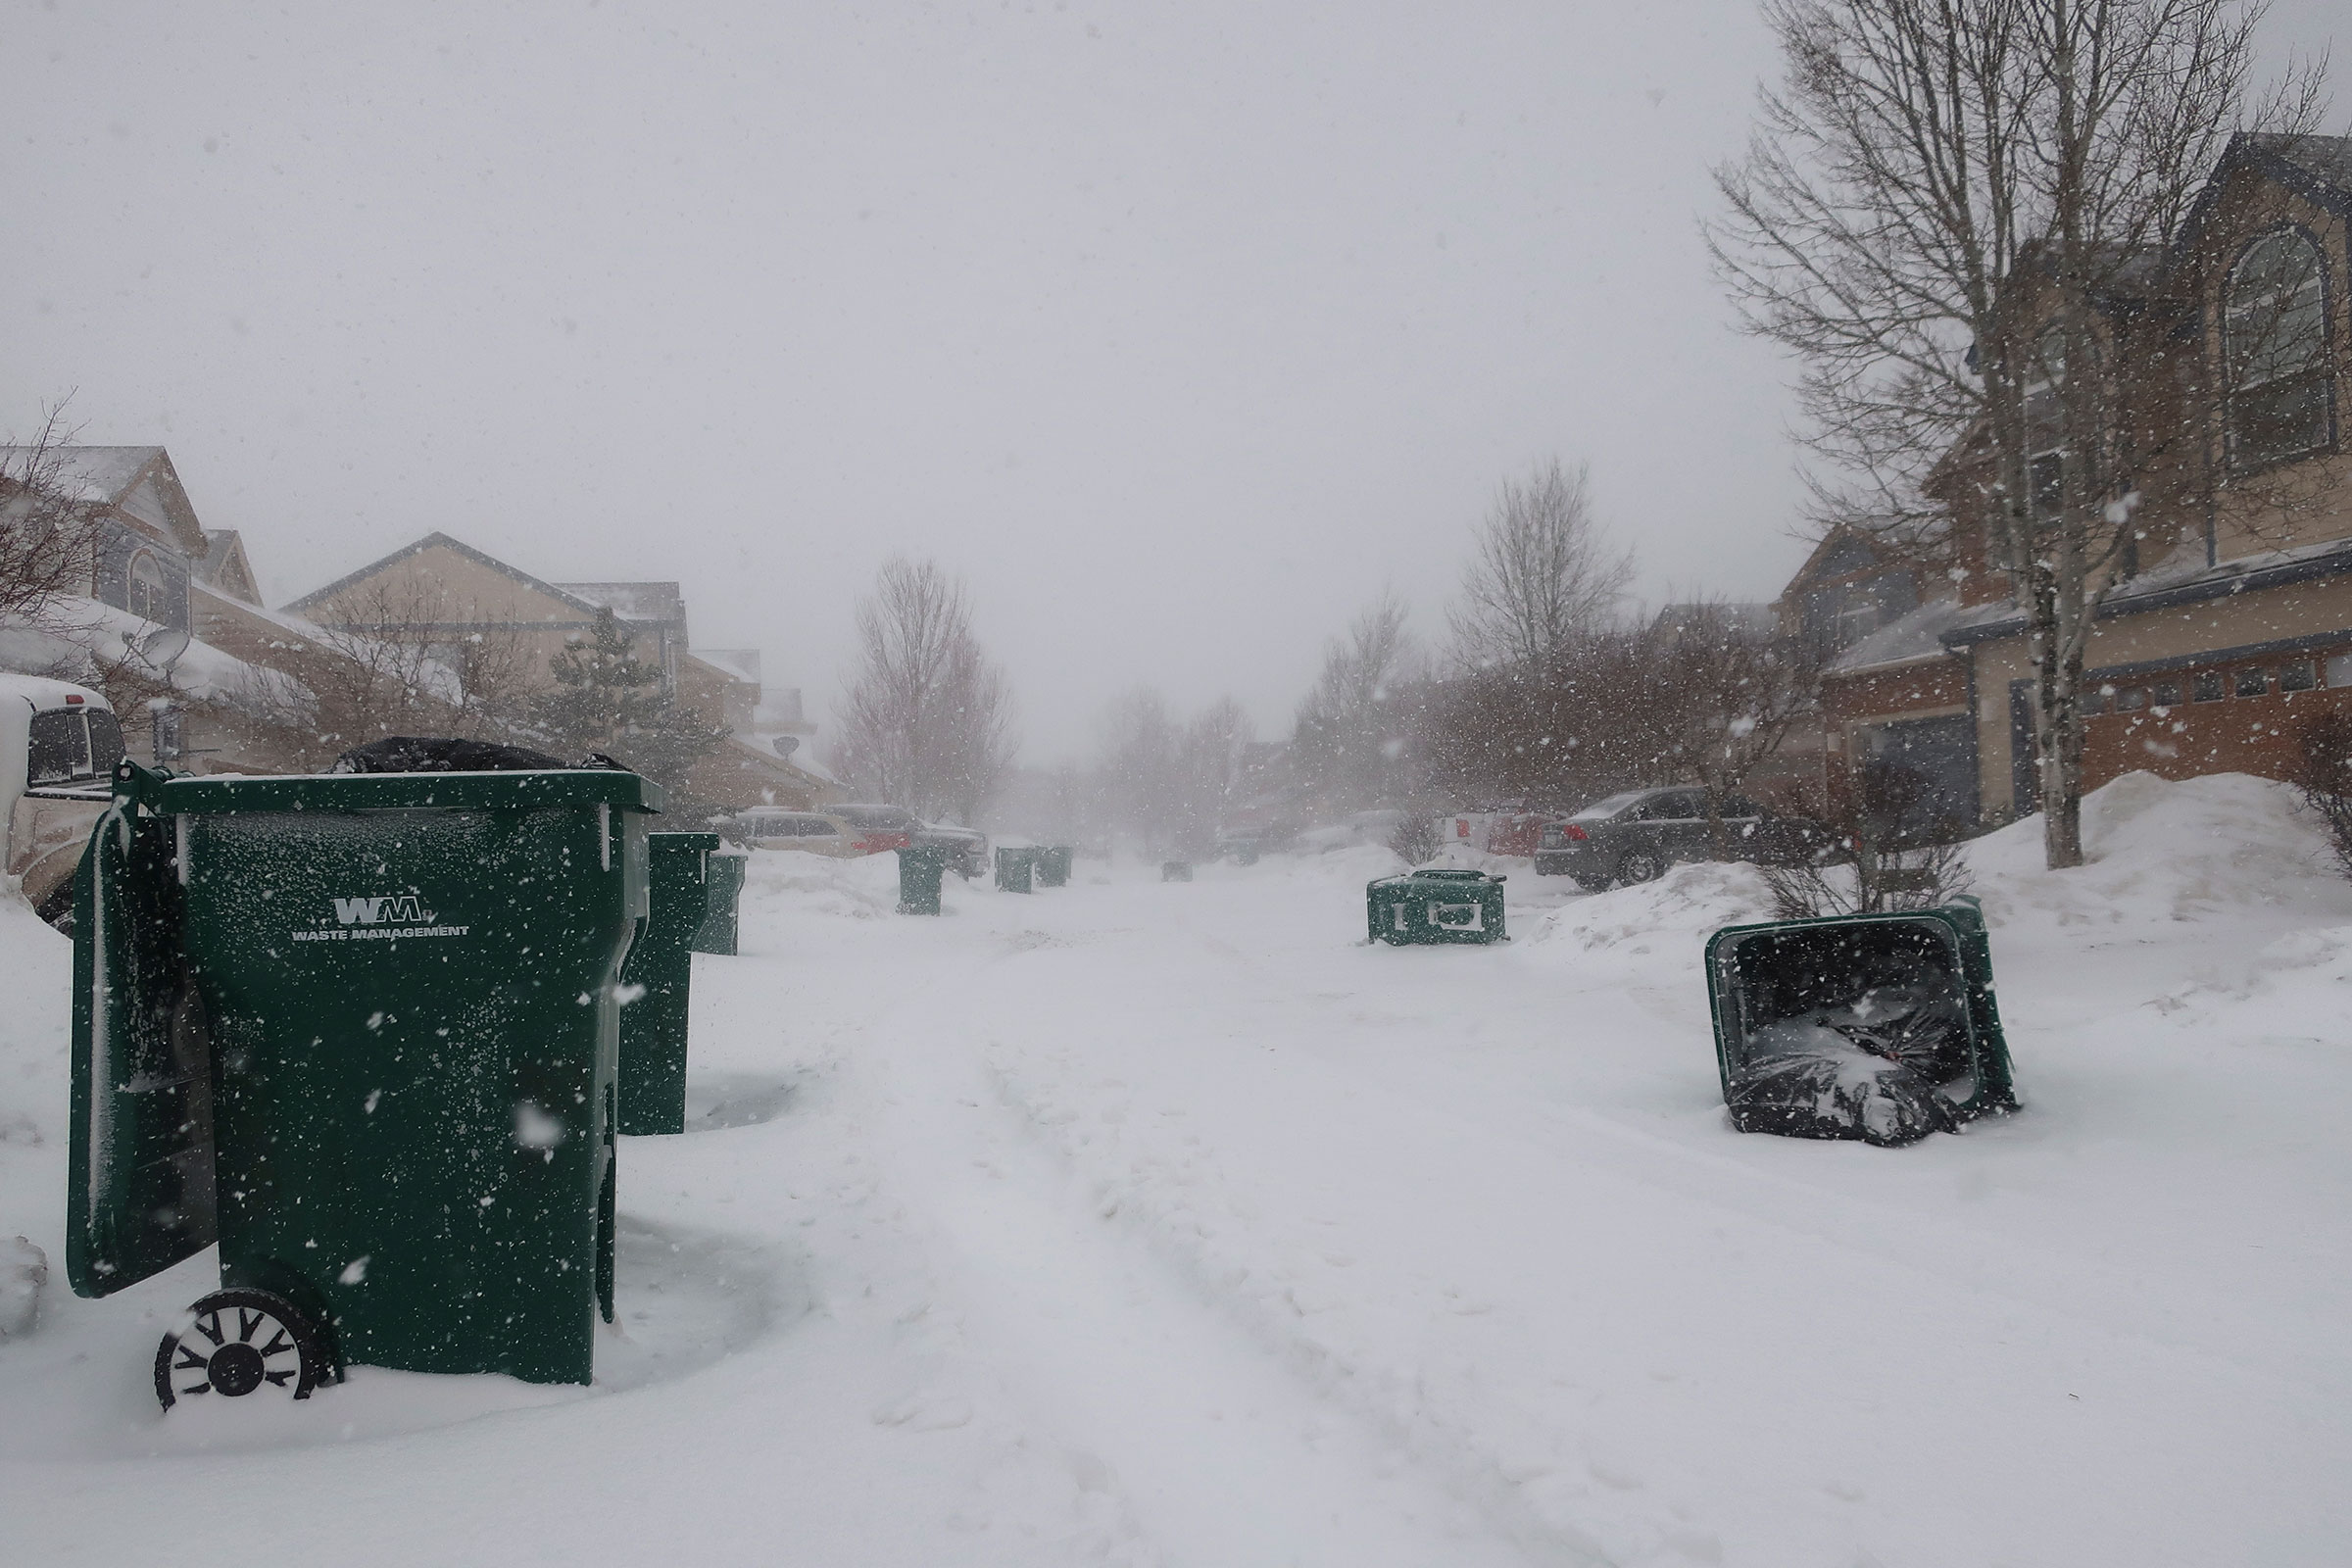 Strong wind gusts blew over trash cans in a neighborhood west of Flagstaff, Ariz., on Feb. 22, 2023.